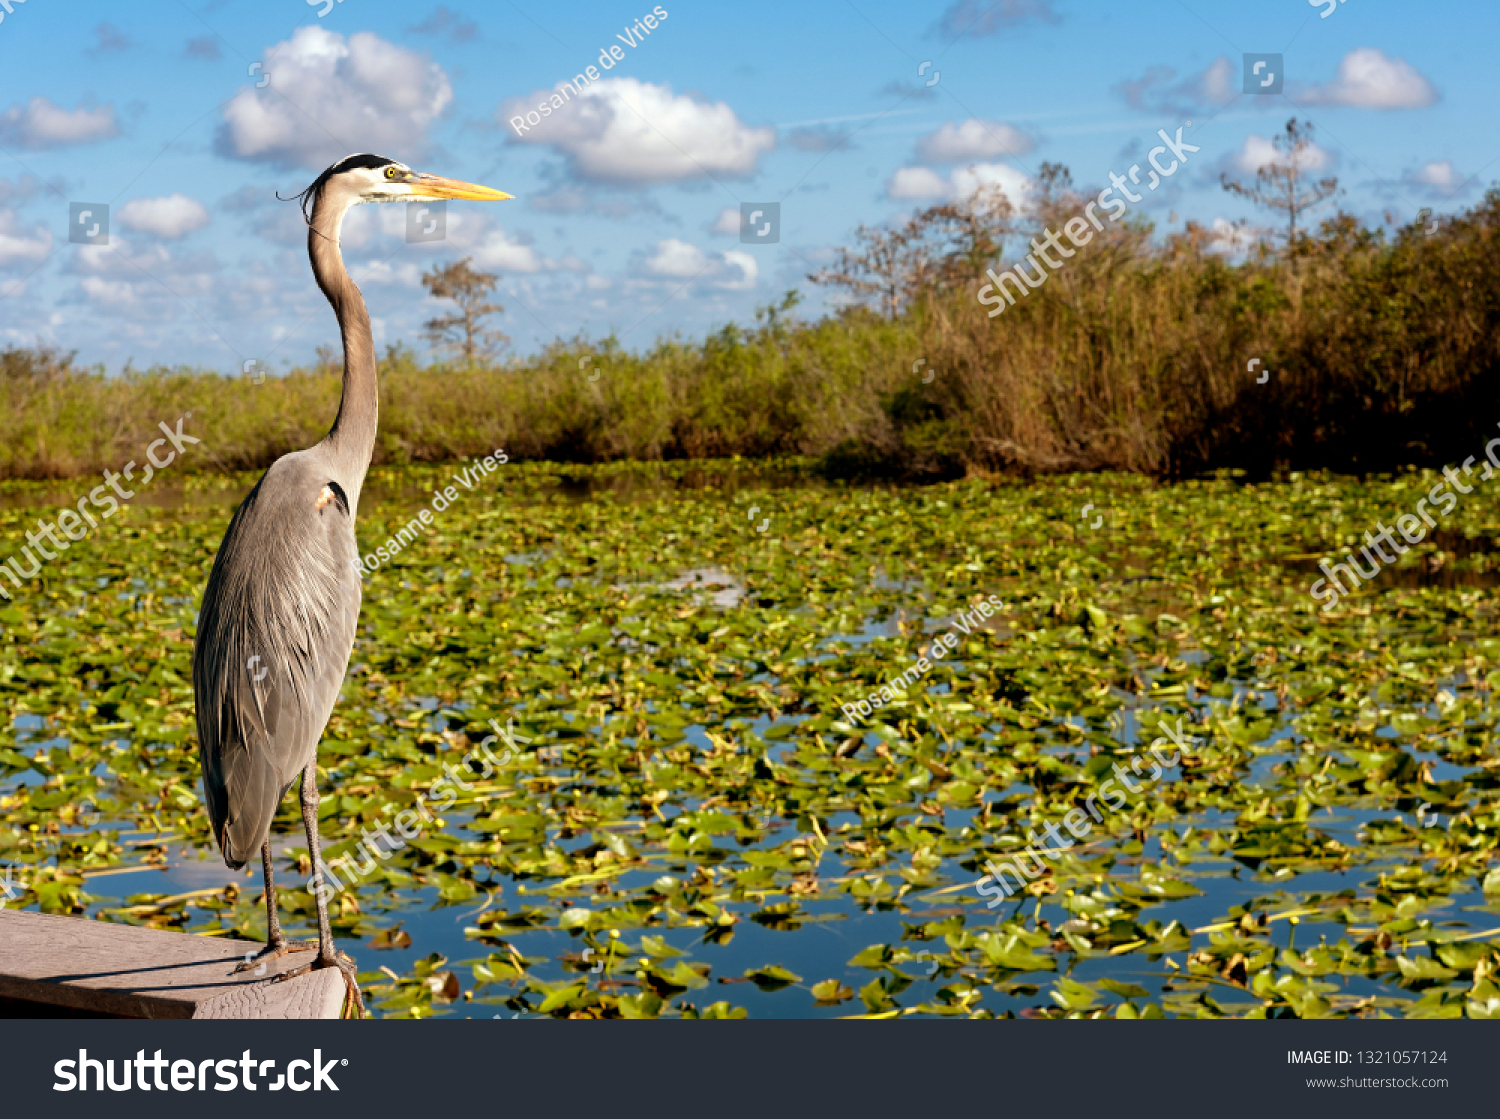 Nature in the Everglades National Park of USA, Florida. With heron next to water with water lilies  #1321057124